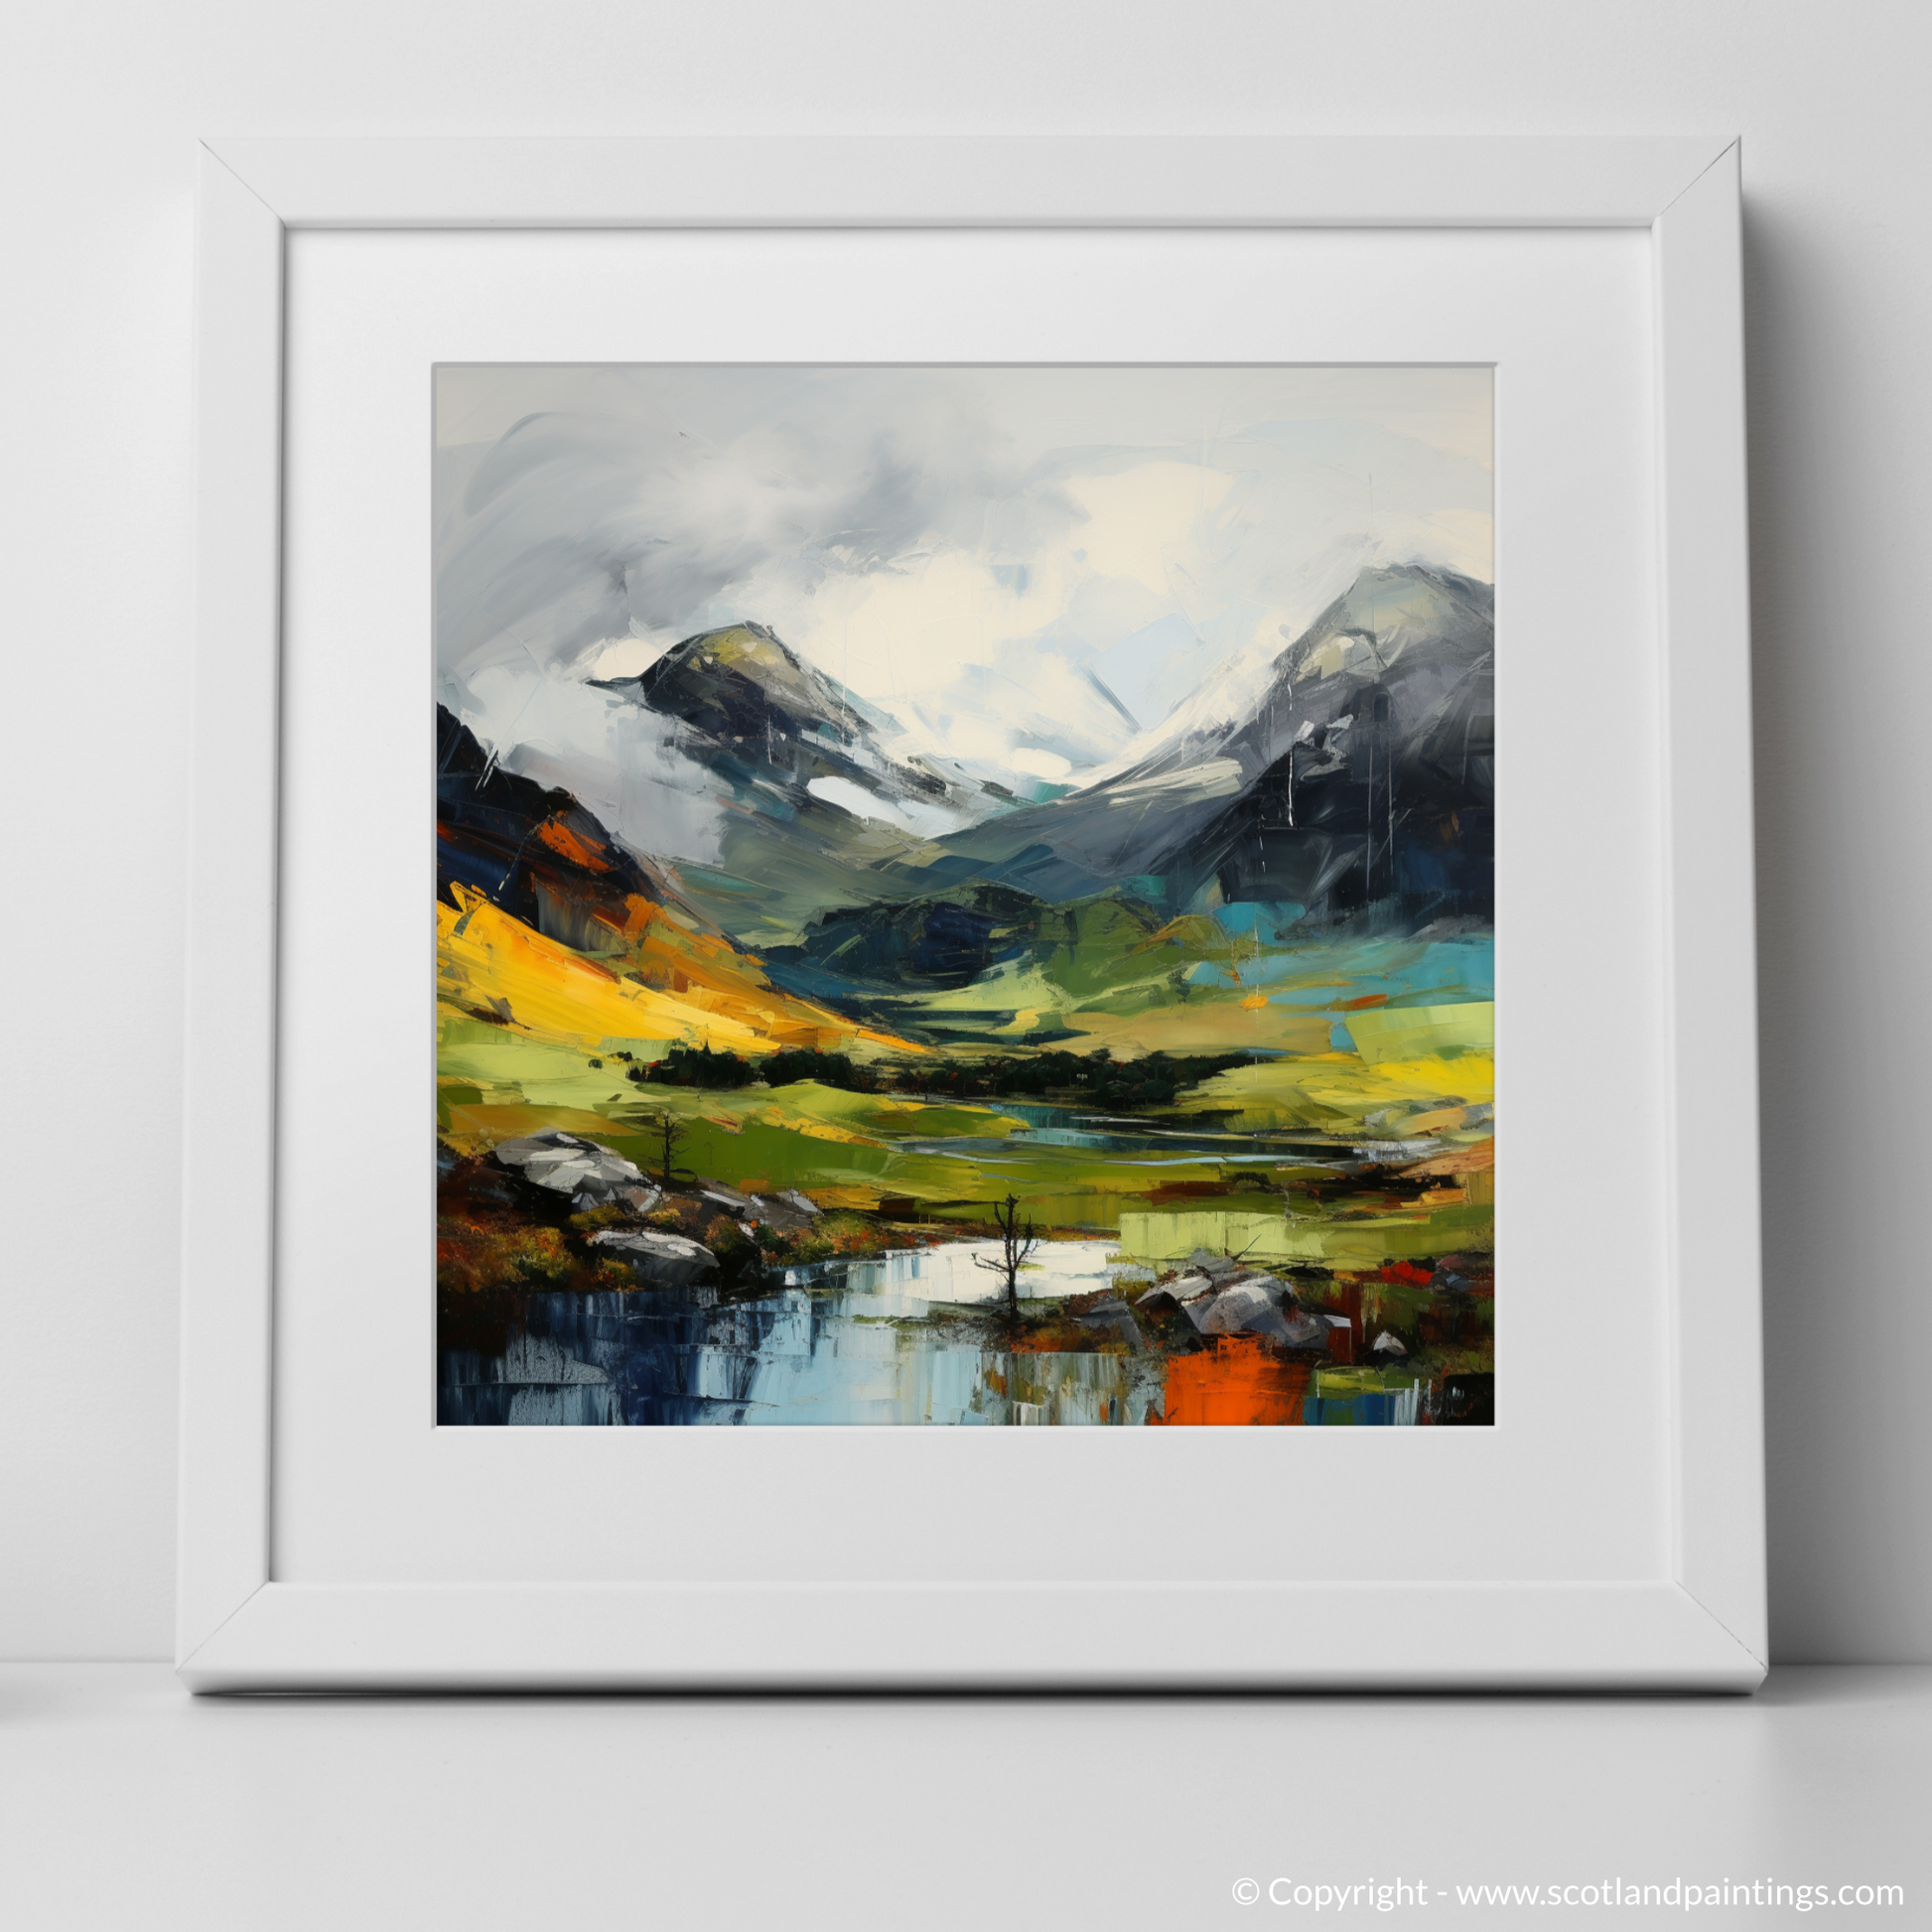 Art Print of Meall Greigh with a white frame